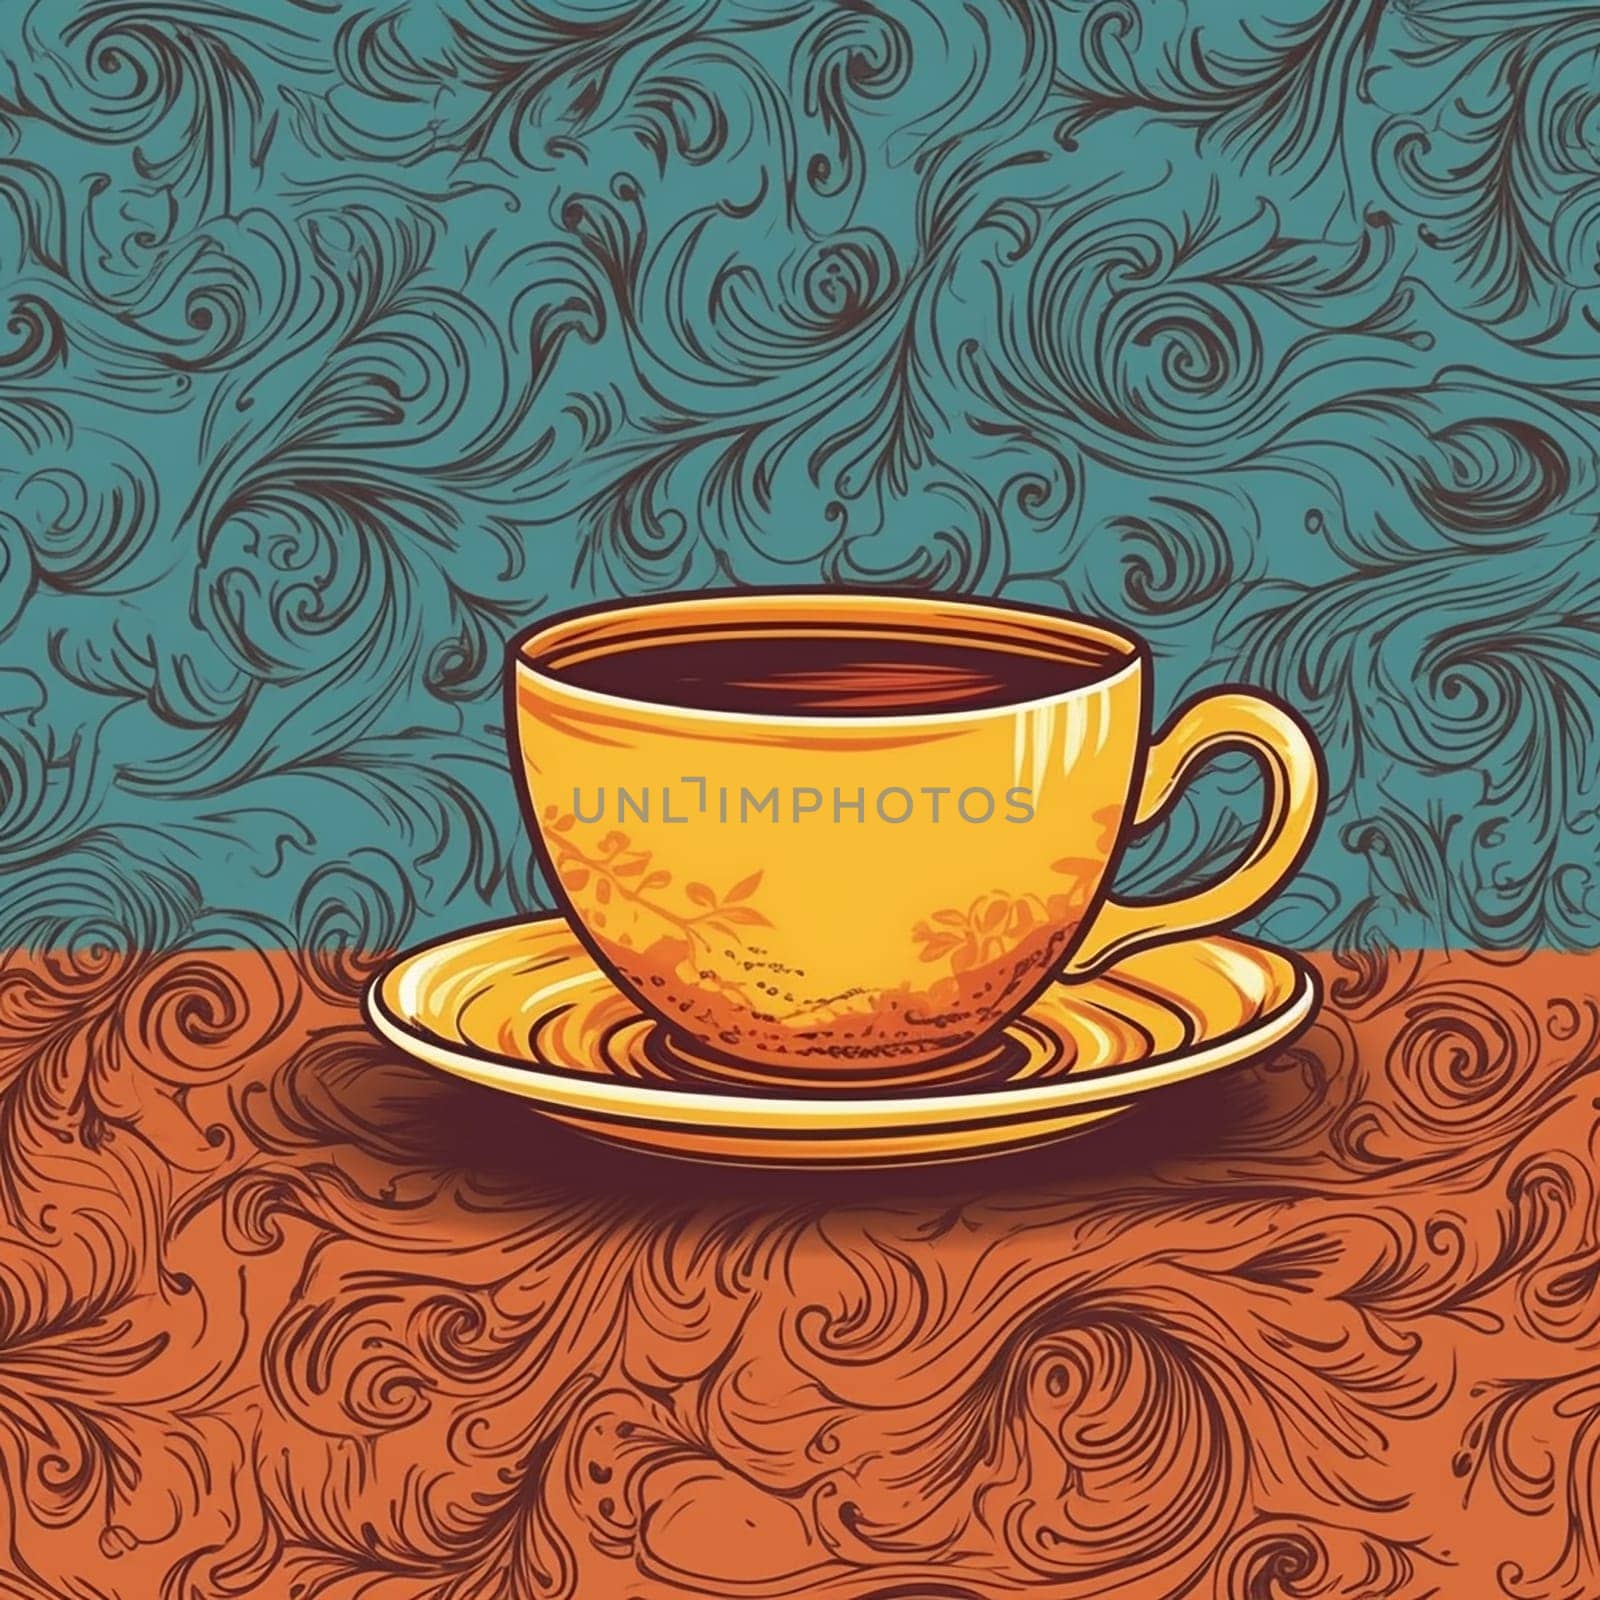 Stylized illustration of a steaming coffee cup on a patterned background.